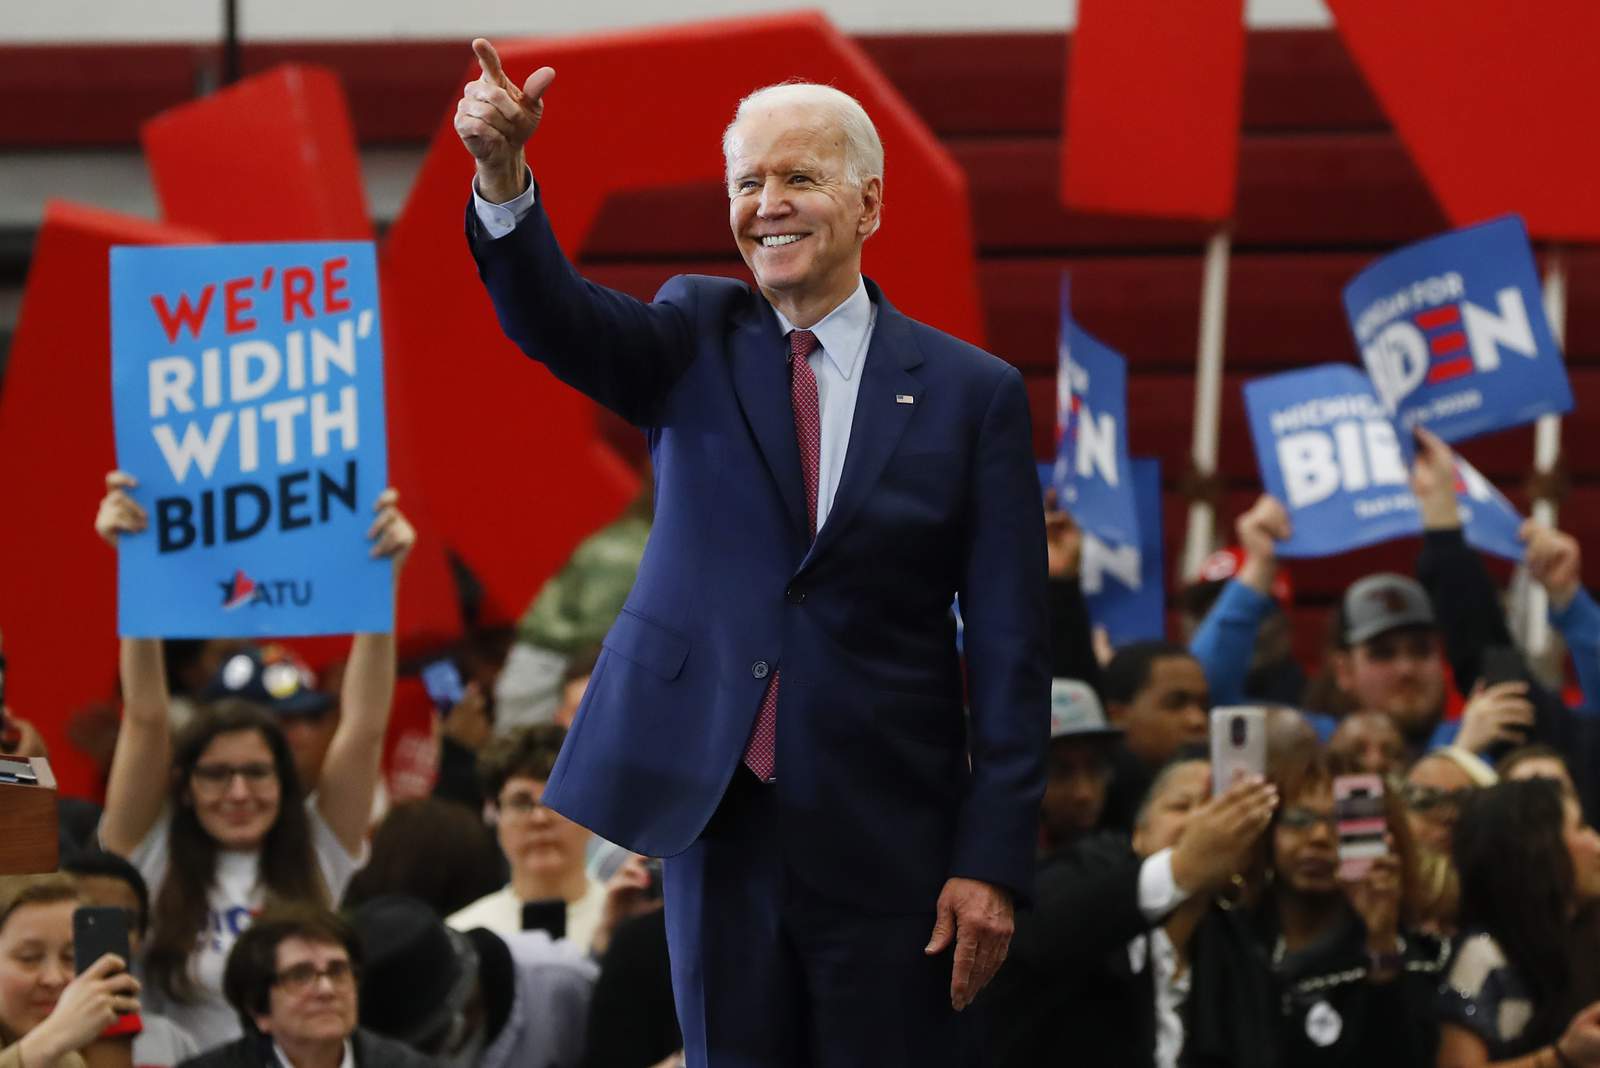 2020 Watch: Will Tuesday clinch the nomination for Biden?